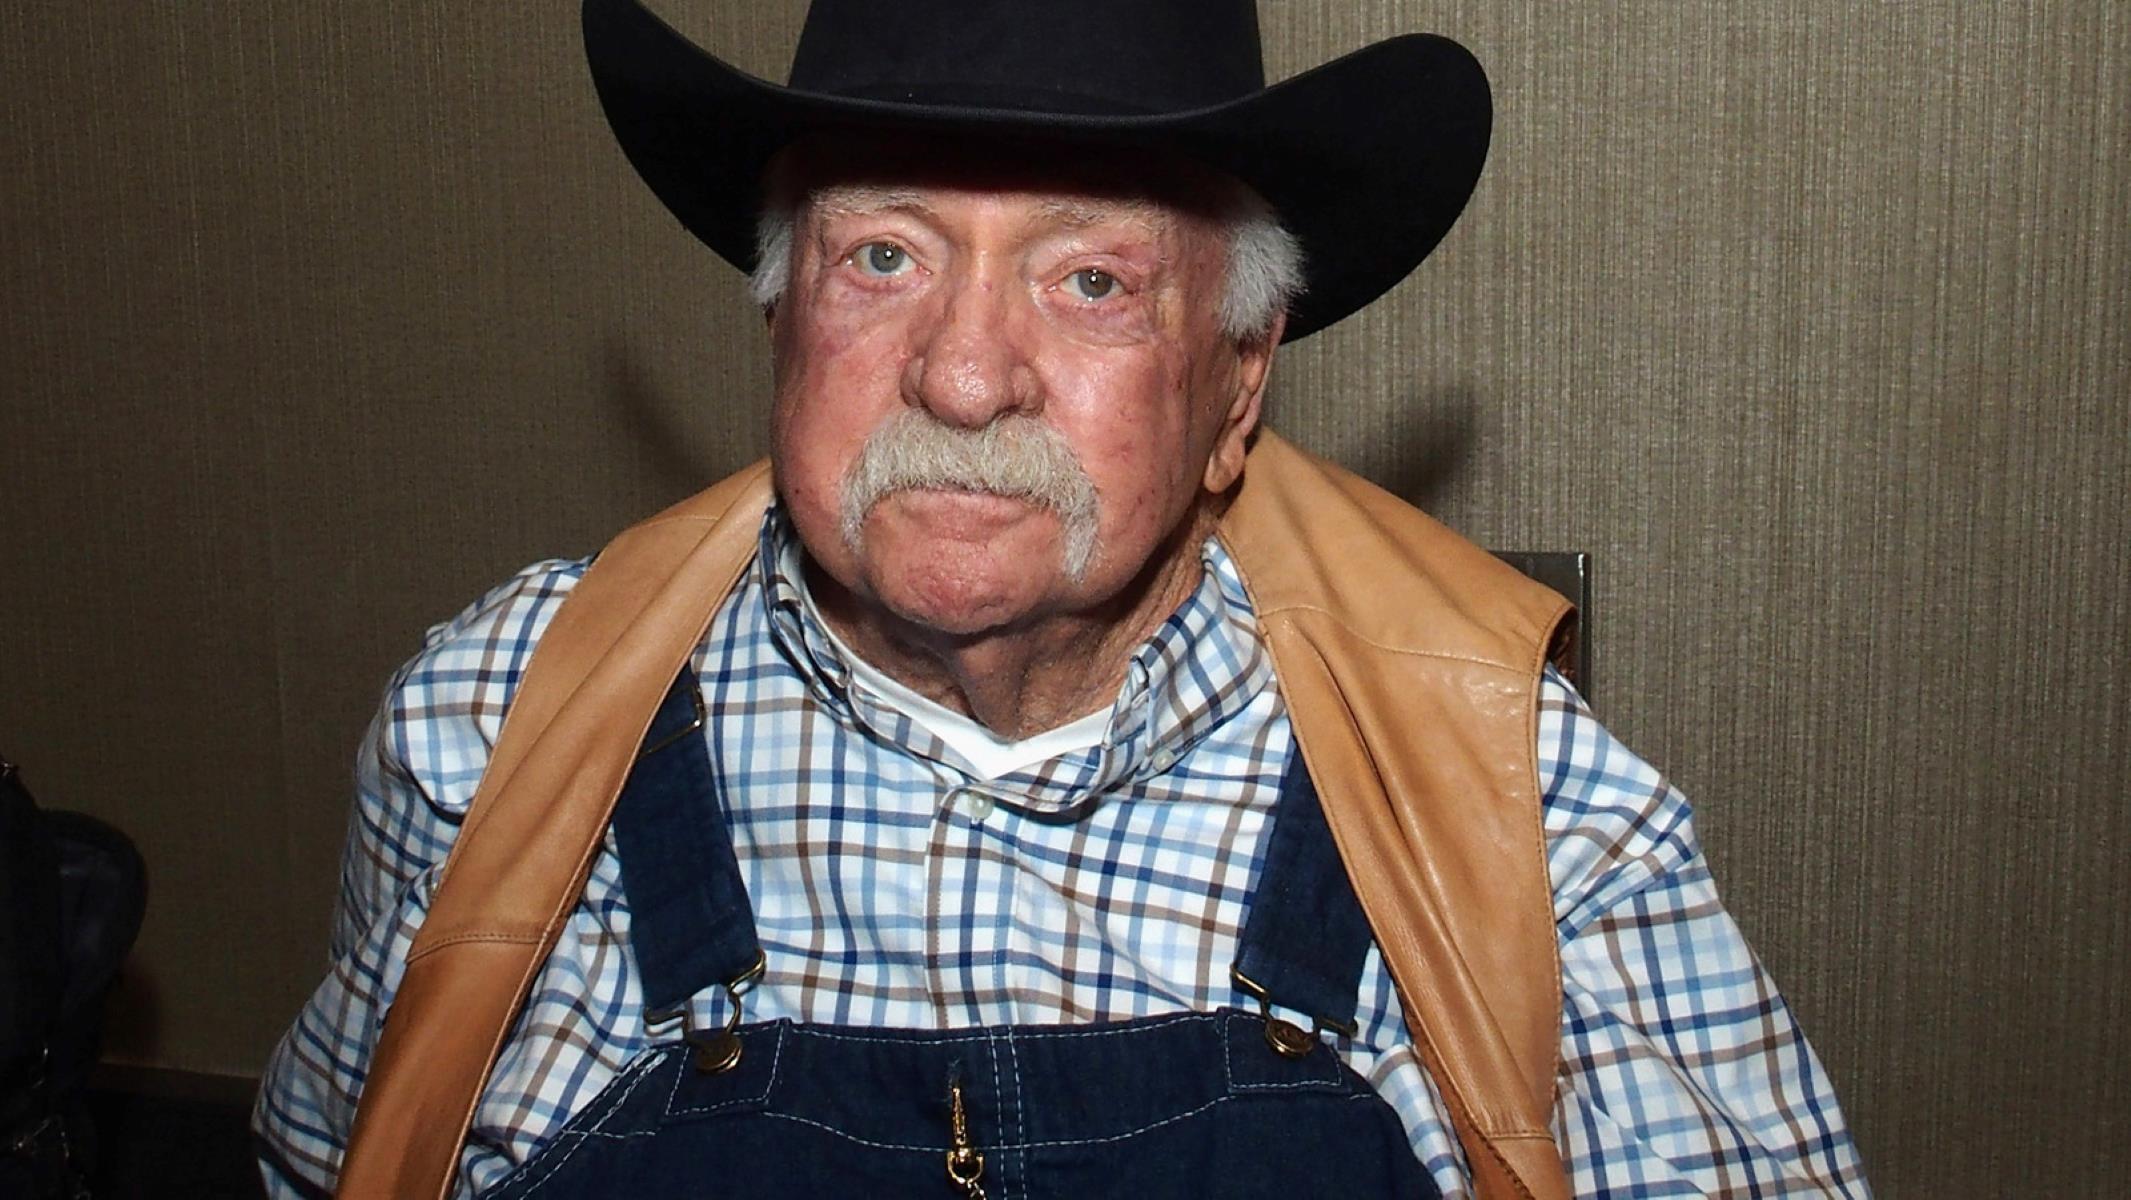 Fans Convinced They Spotted Wilford Brimley In 'Yellowstone' Despite His Absence